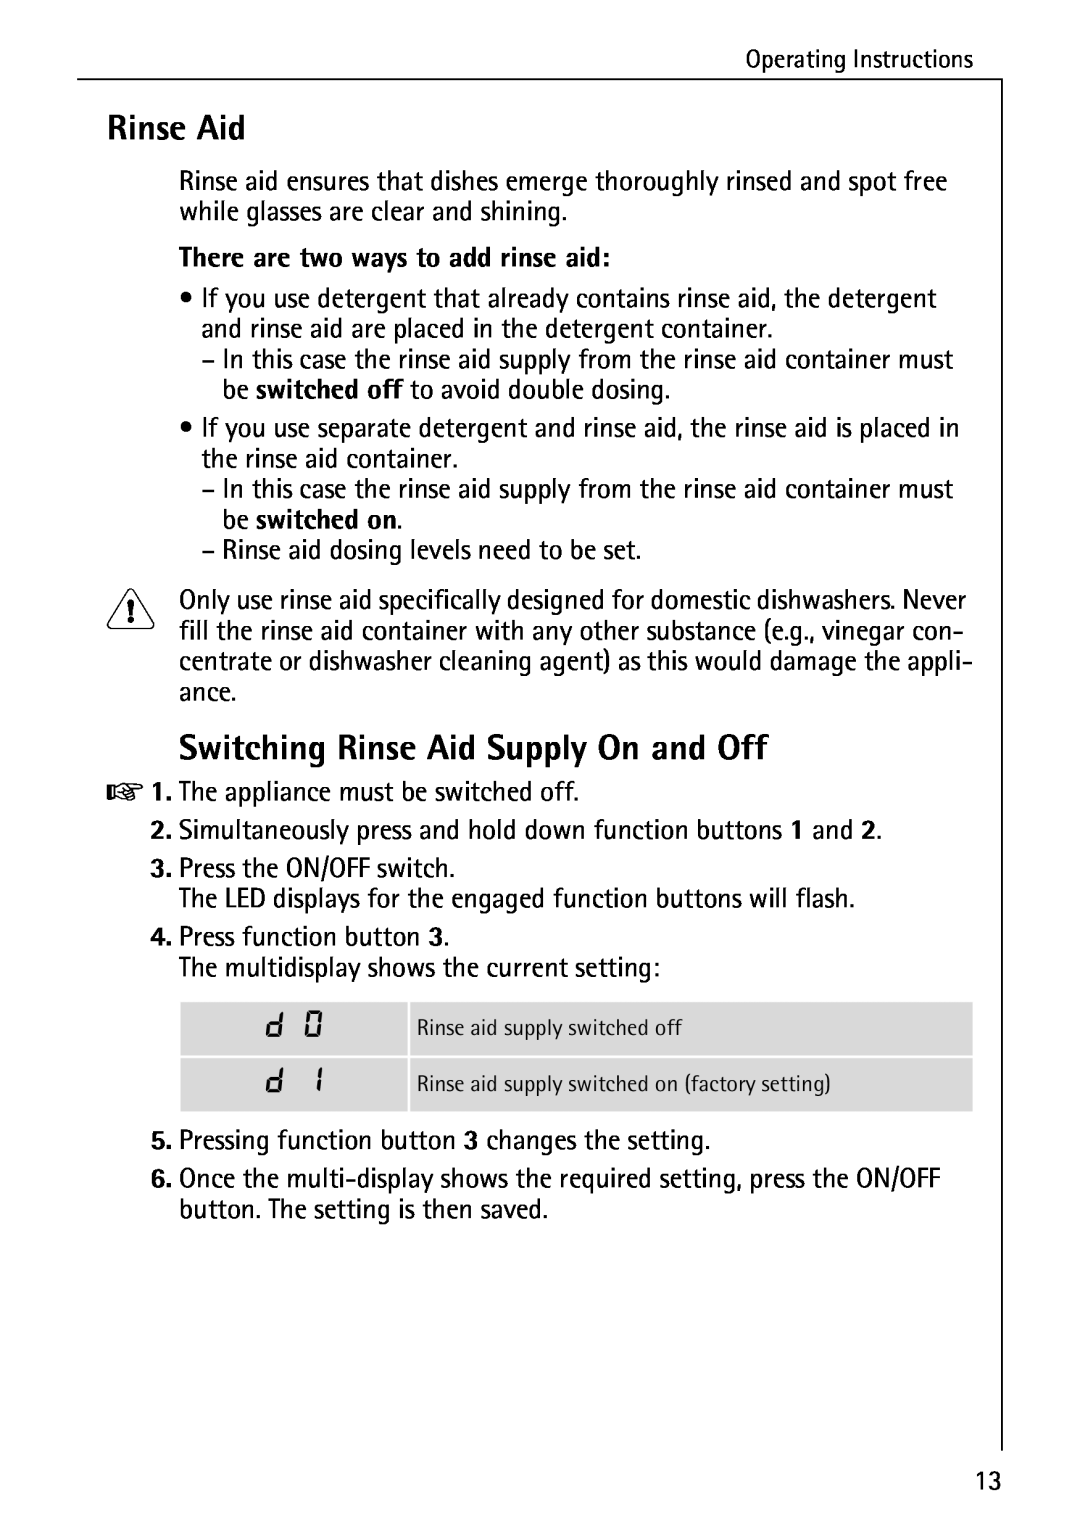 AEG 3A manual Switching Rinse Aid Supply On and Off, There are two ways to add rinse aid 